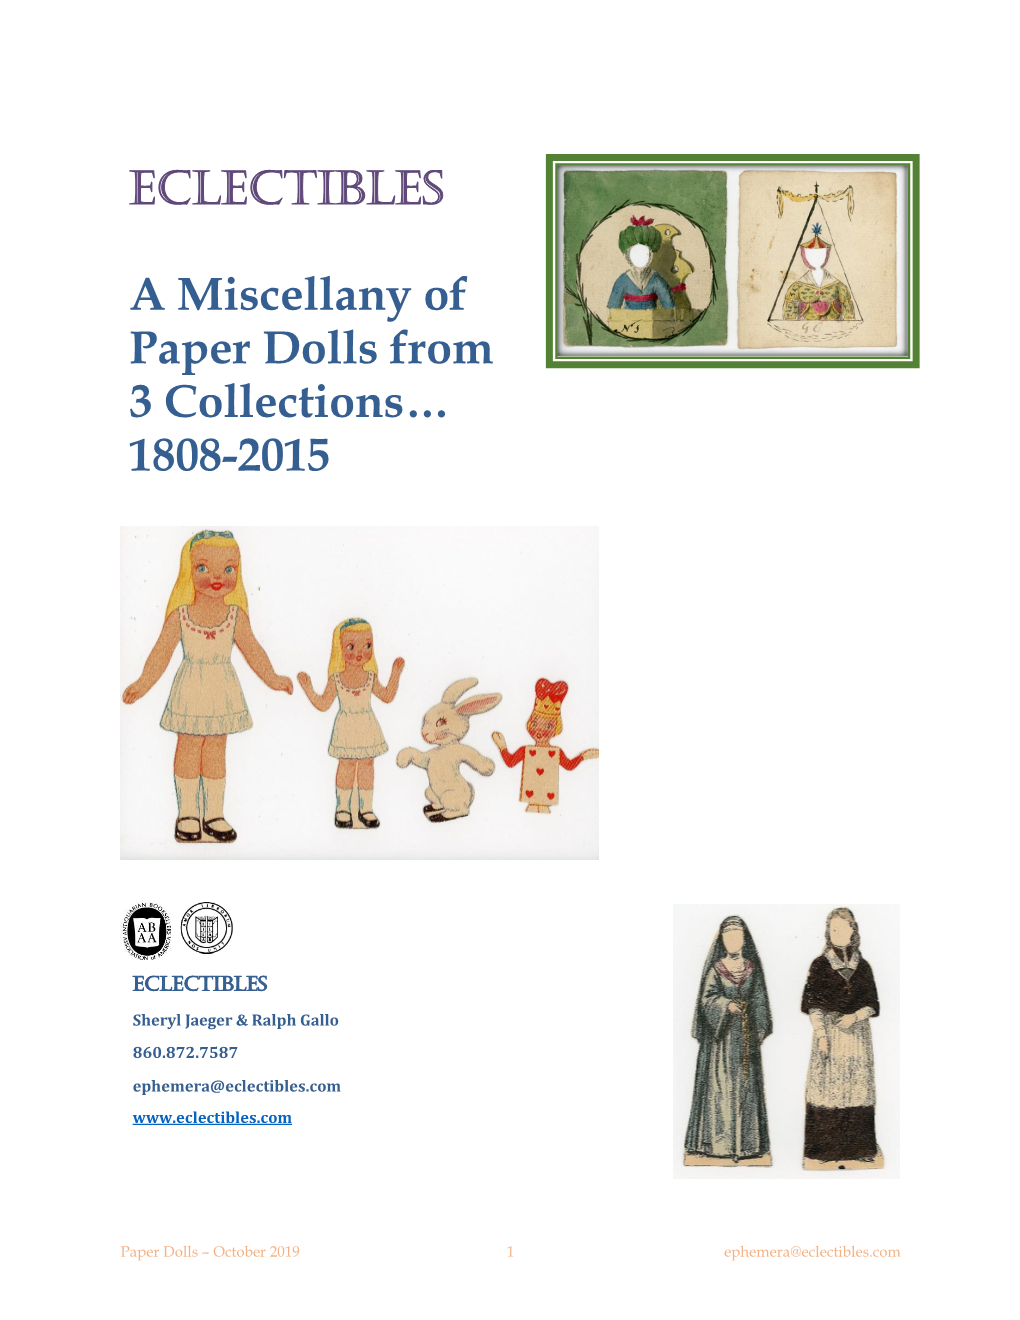 ECLECTIBLES a Miscellany of Paper Dolls from 3 Collections… 1808-2015